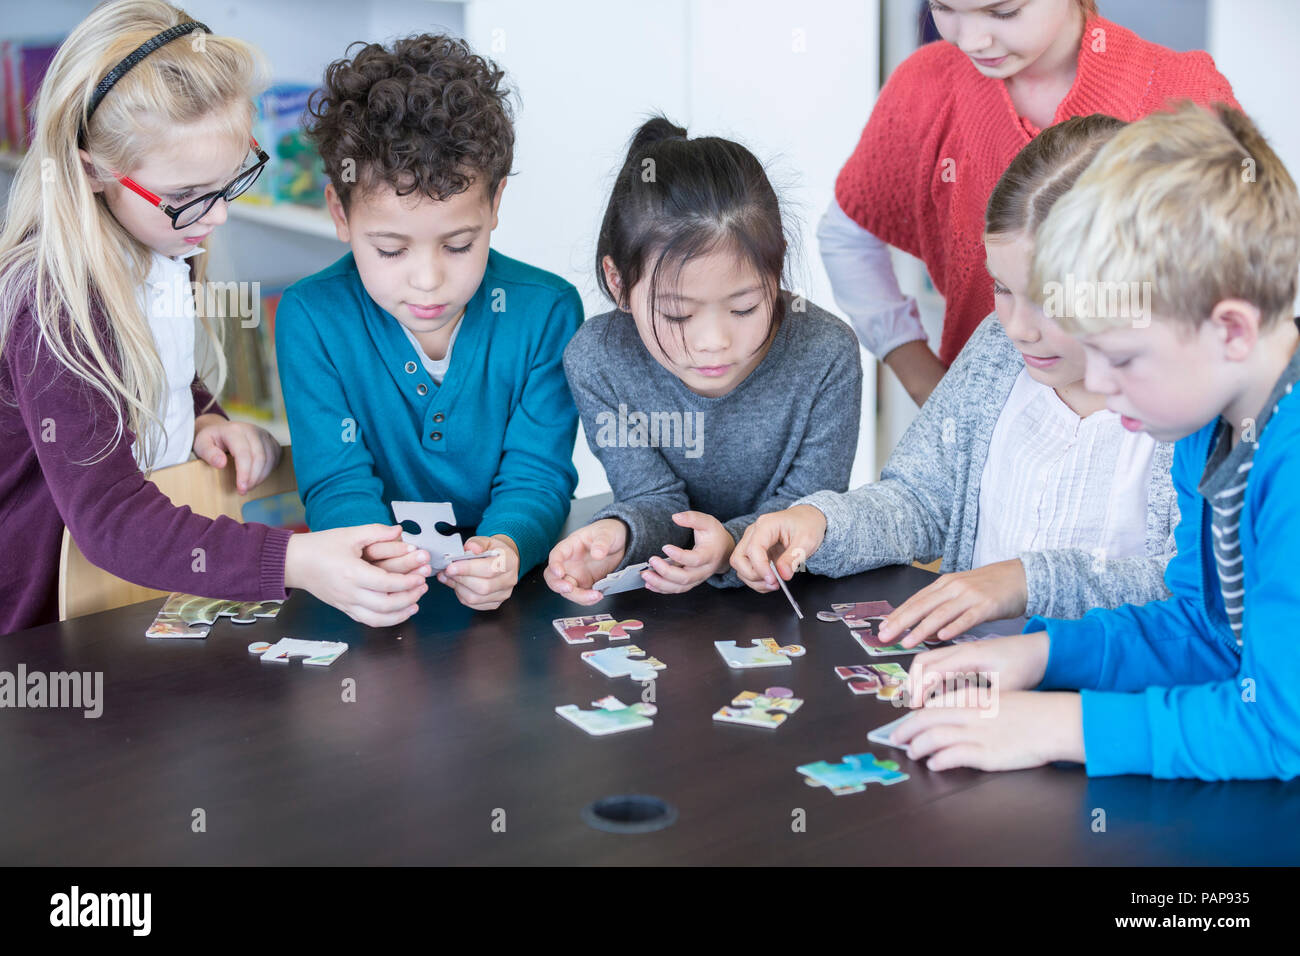 Pupils playing jigsaw puzzle in school together Stock Photo